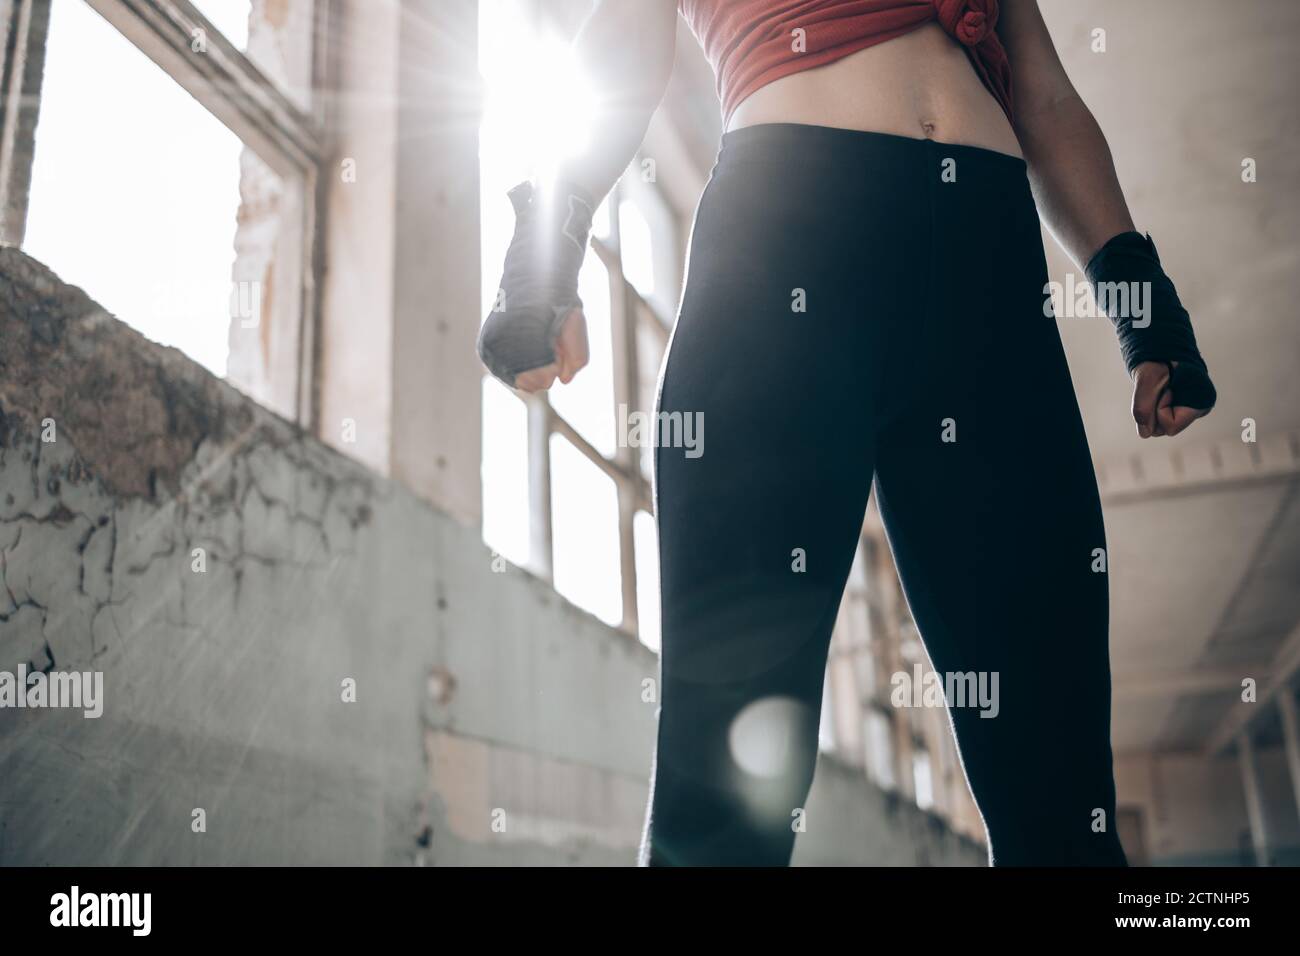 Lower part of strong, fit, female body in black leggings. Fitness fashion Stock Photo